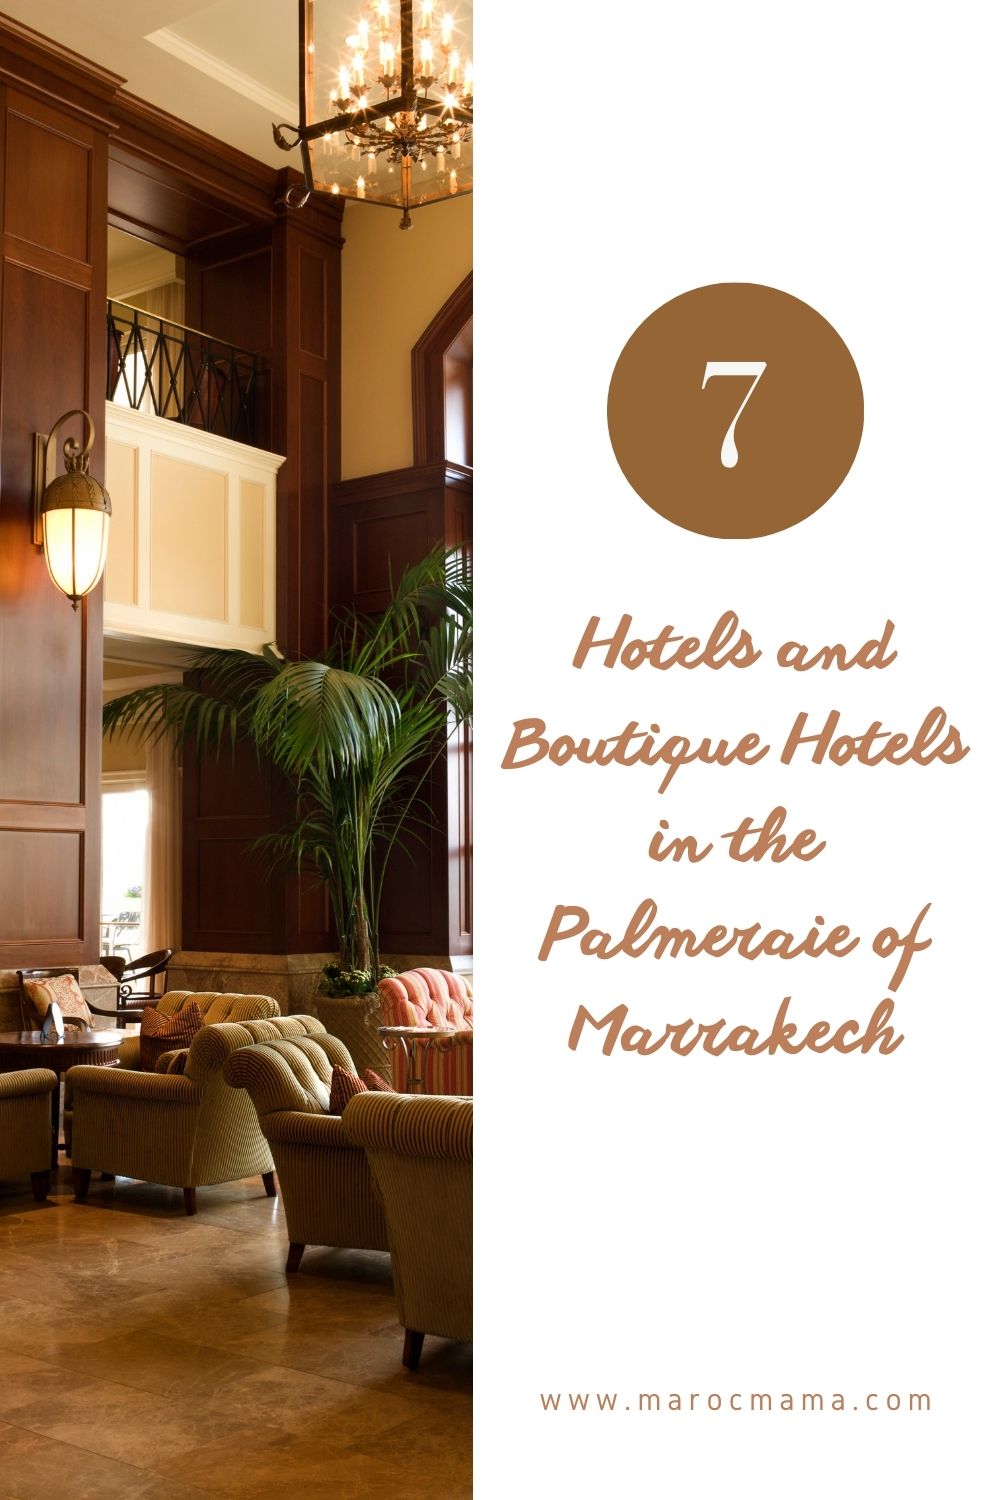 7 Hotels and Boutique Hotels in the Palmeraie of Marrakech